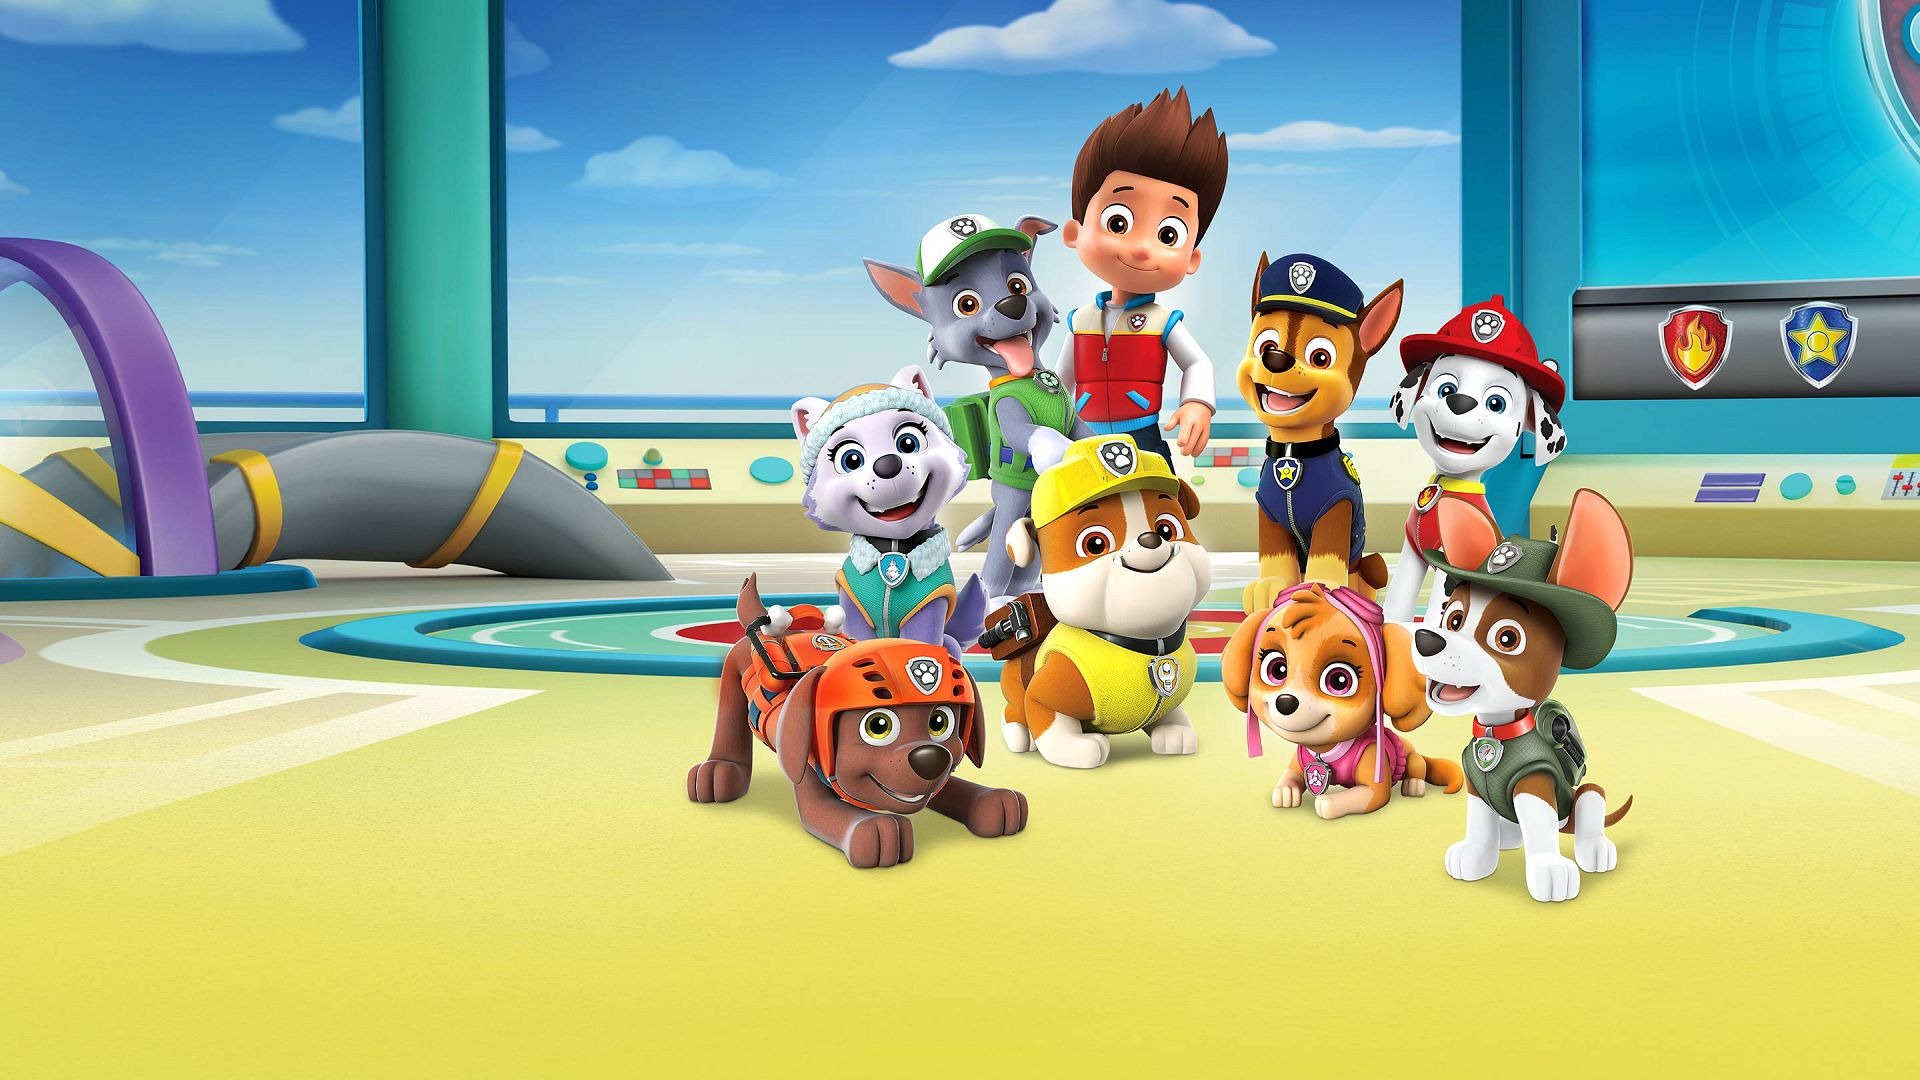 Nickelodeon extends 'Paw Patrol' & spin-off 'Rubble & Crew' - TBI